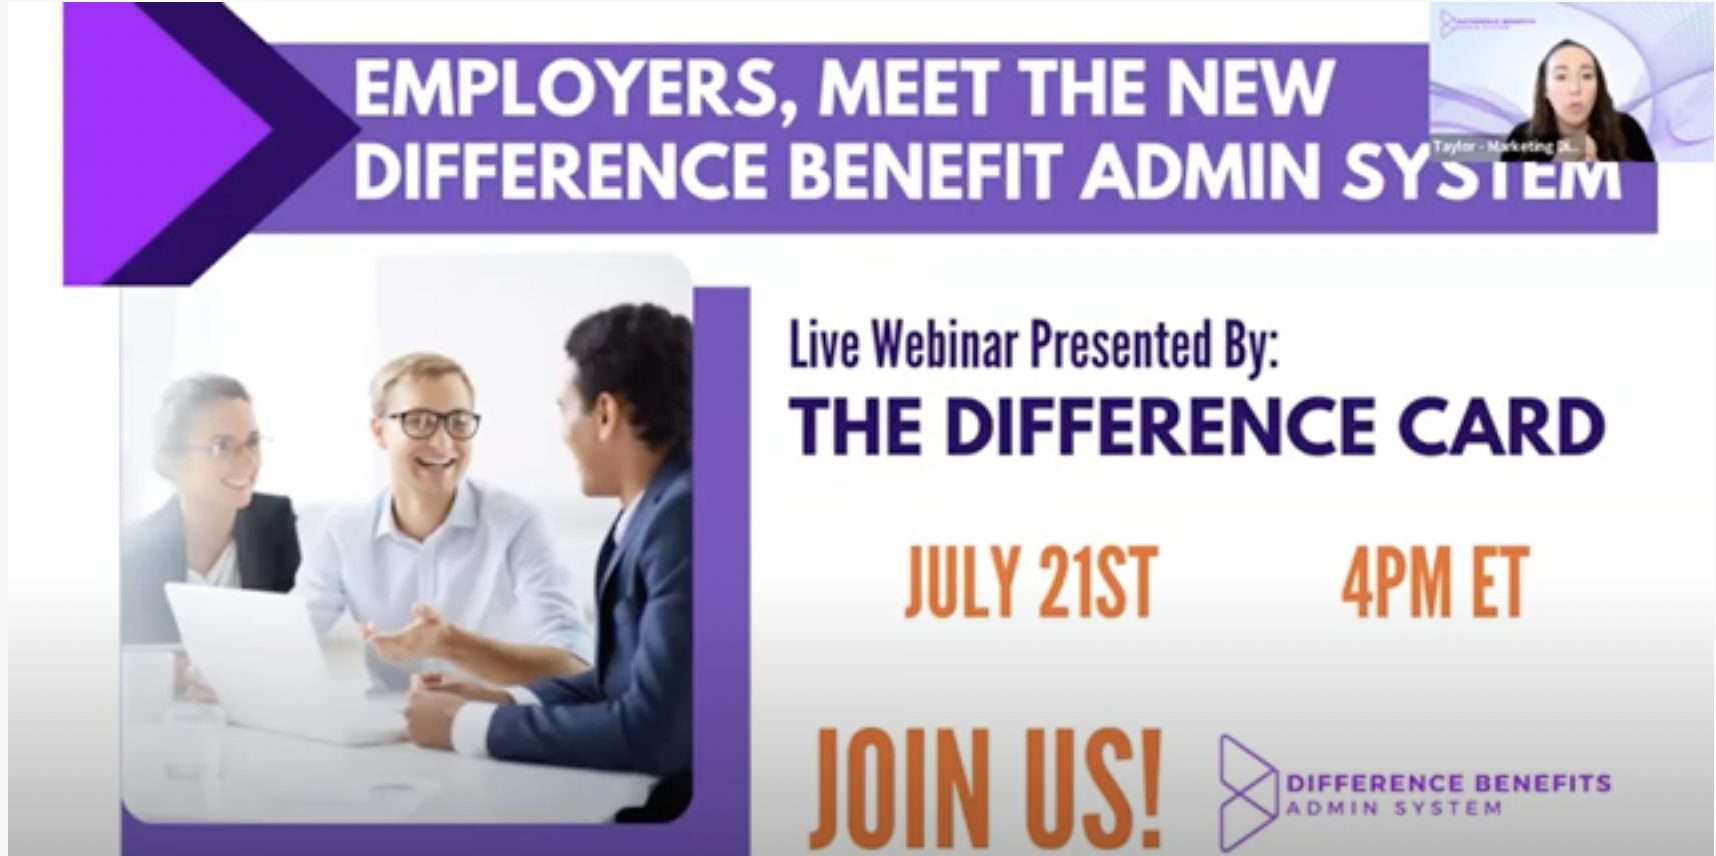 Webinar for Difference Card Benefit Admin System